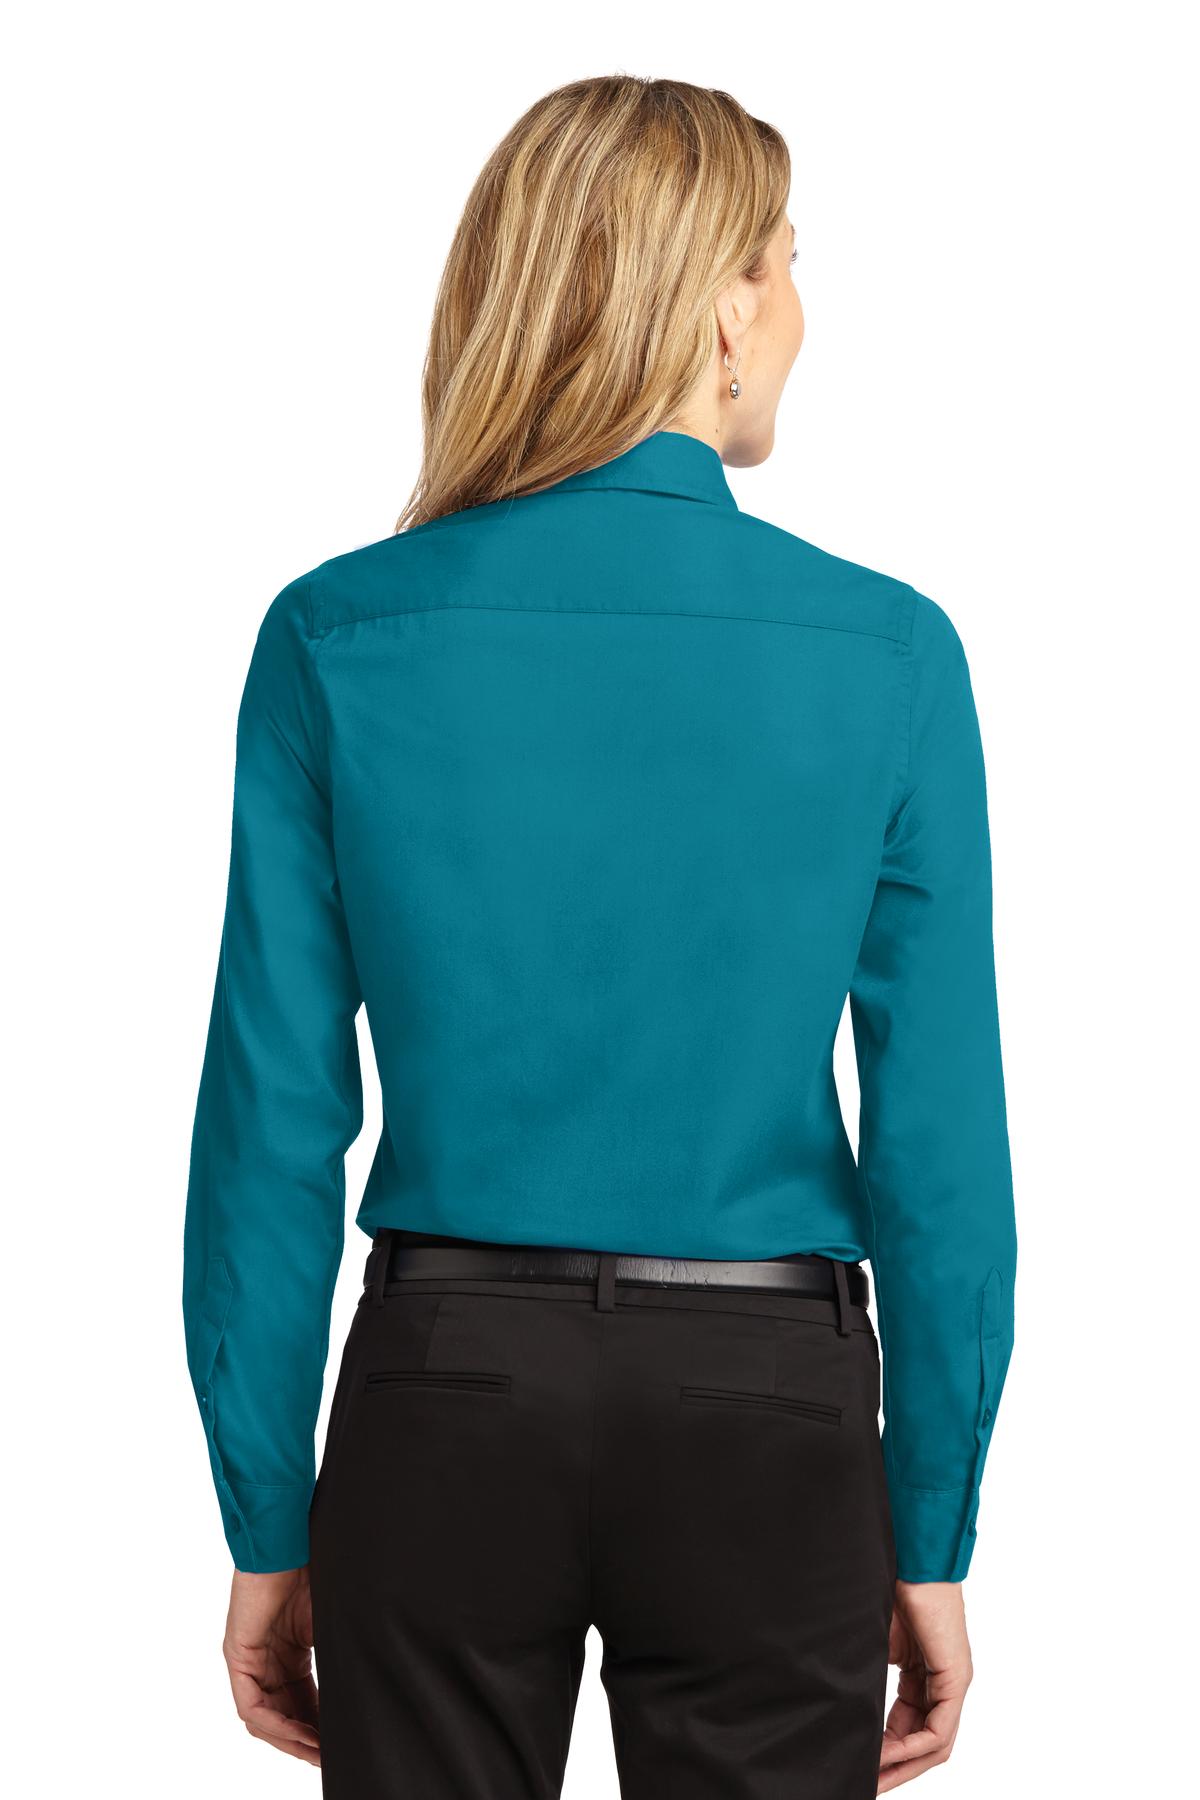 Port Authority® Ladies Long Sleeve Easy Care Shirt. L608 [Teal Green] - DFW Impression